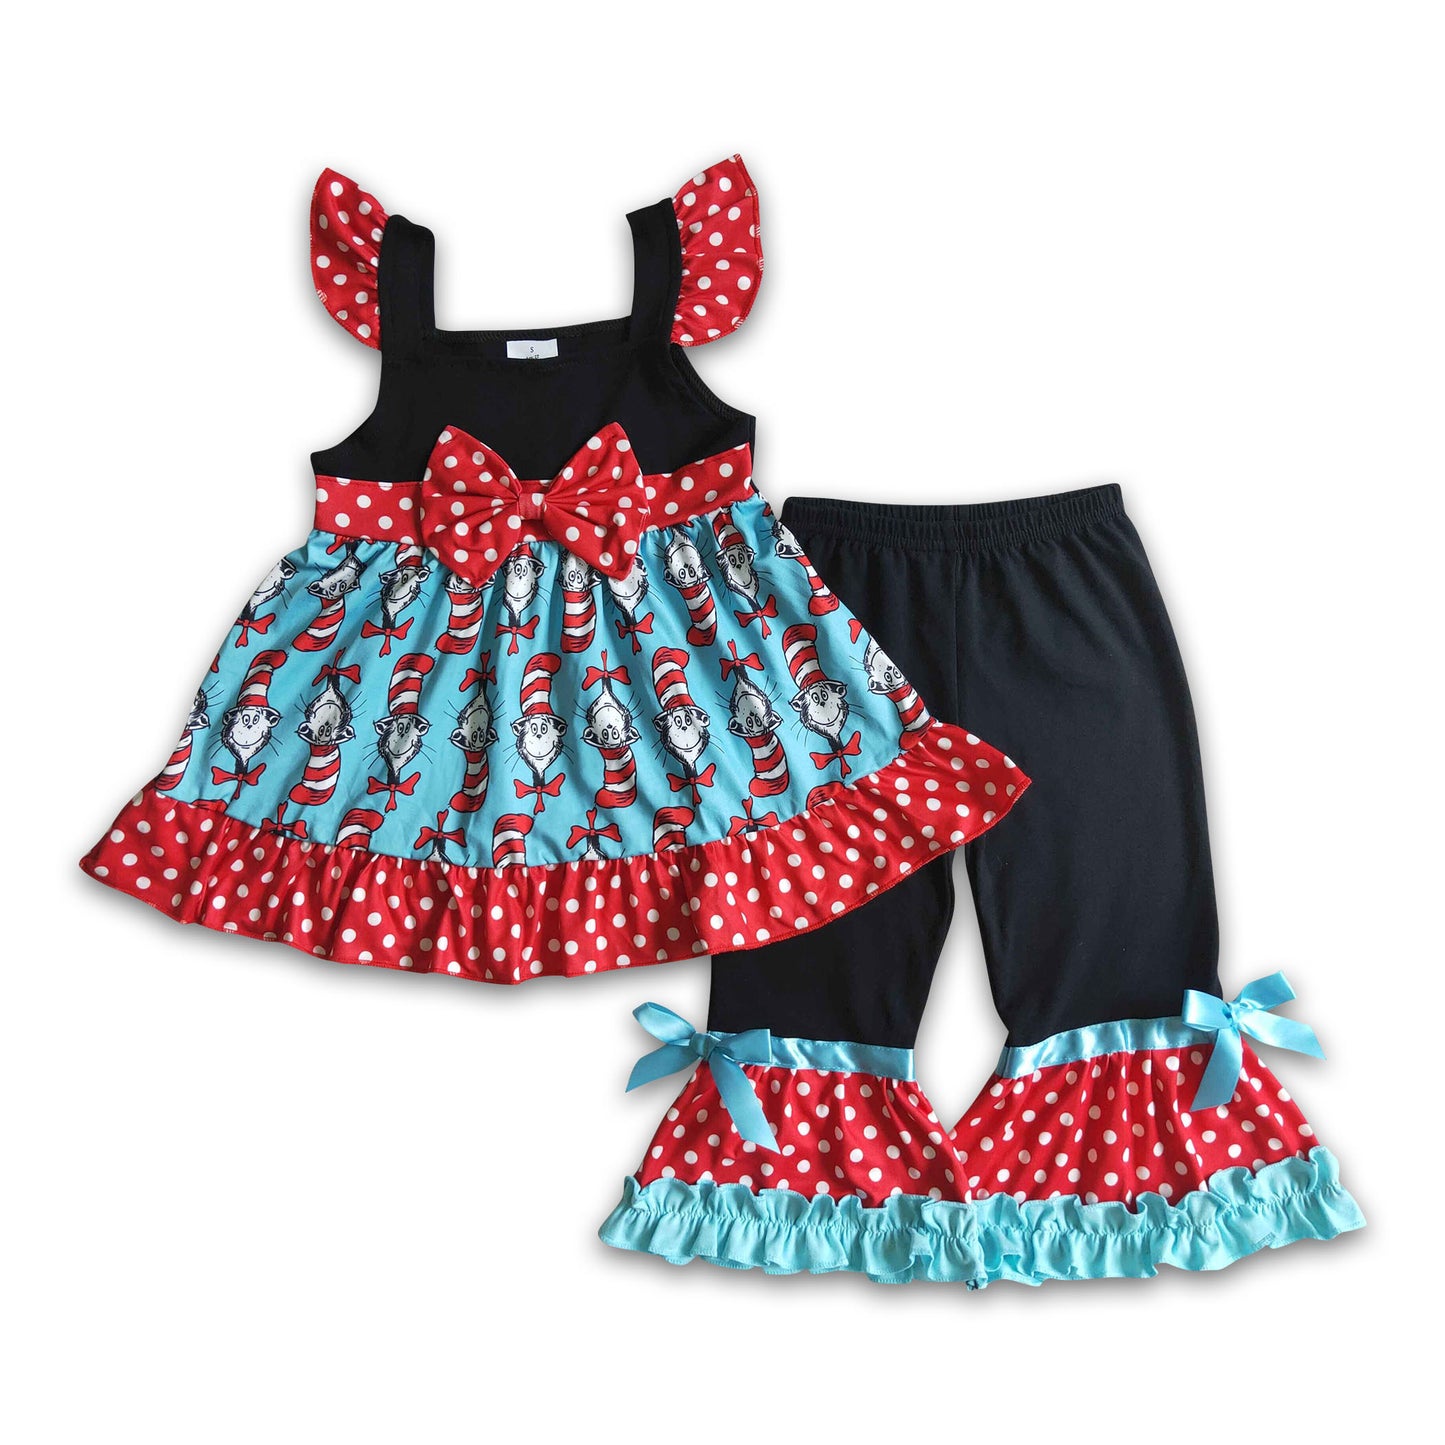 Bow cat cute print tunic girls outfits